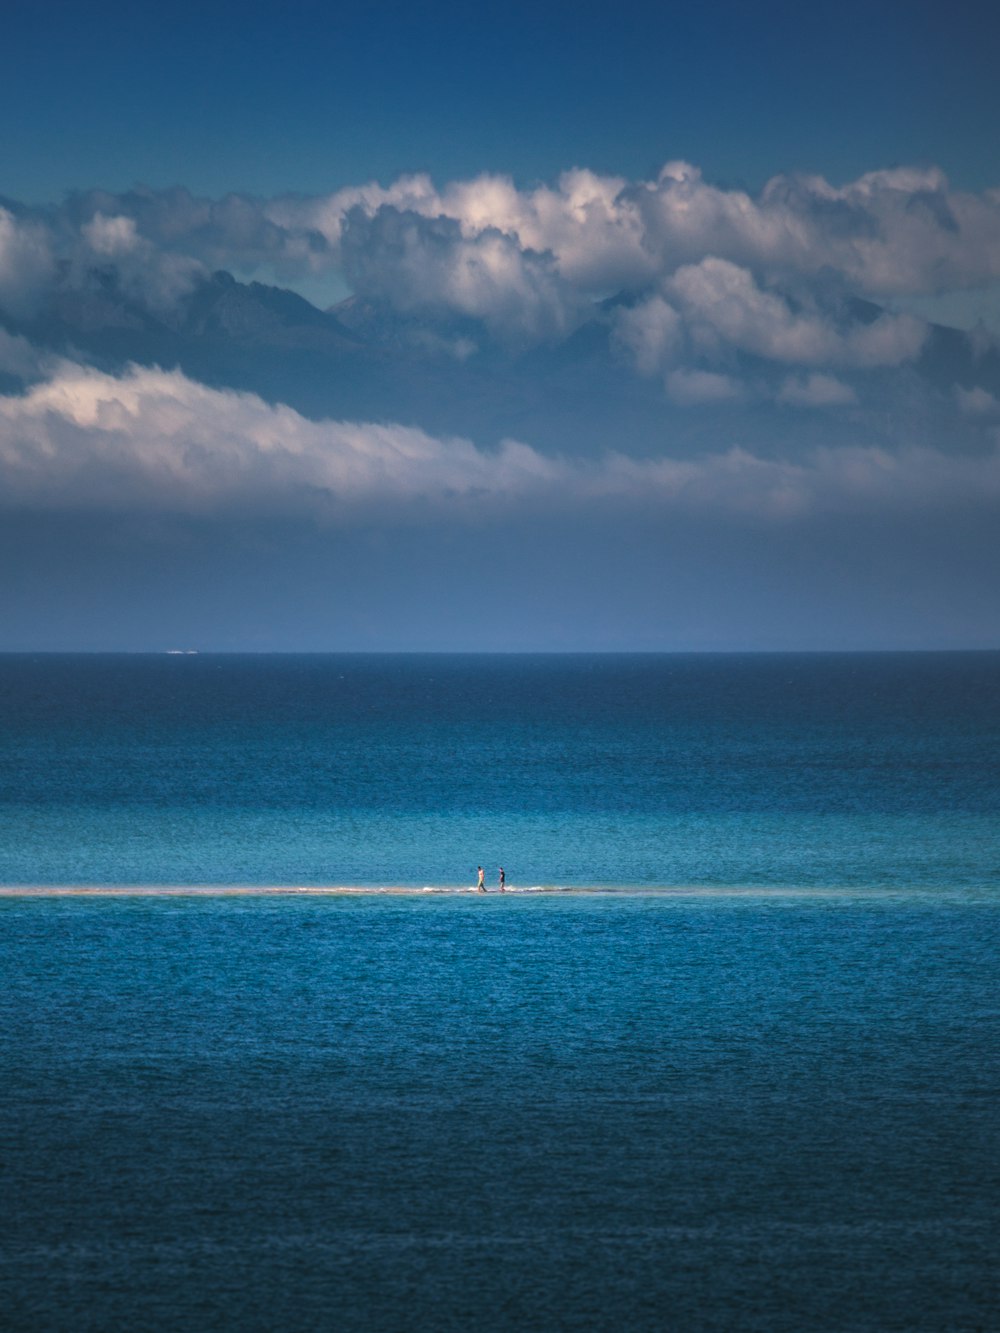 blue sea under white clouds and blue sky during daytime